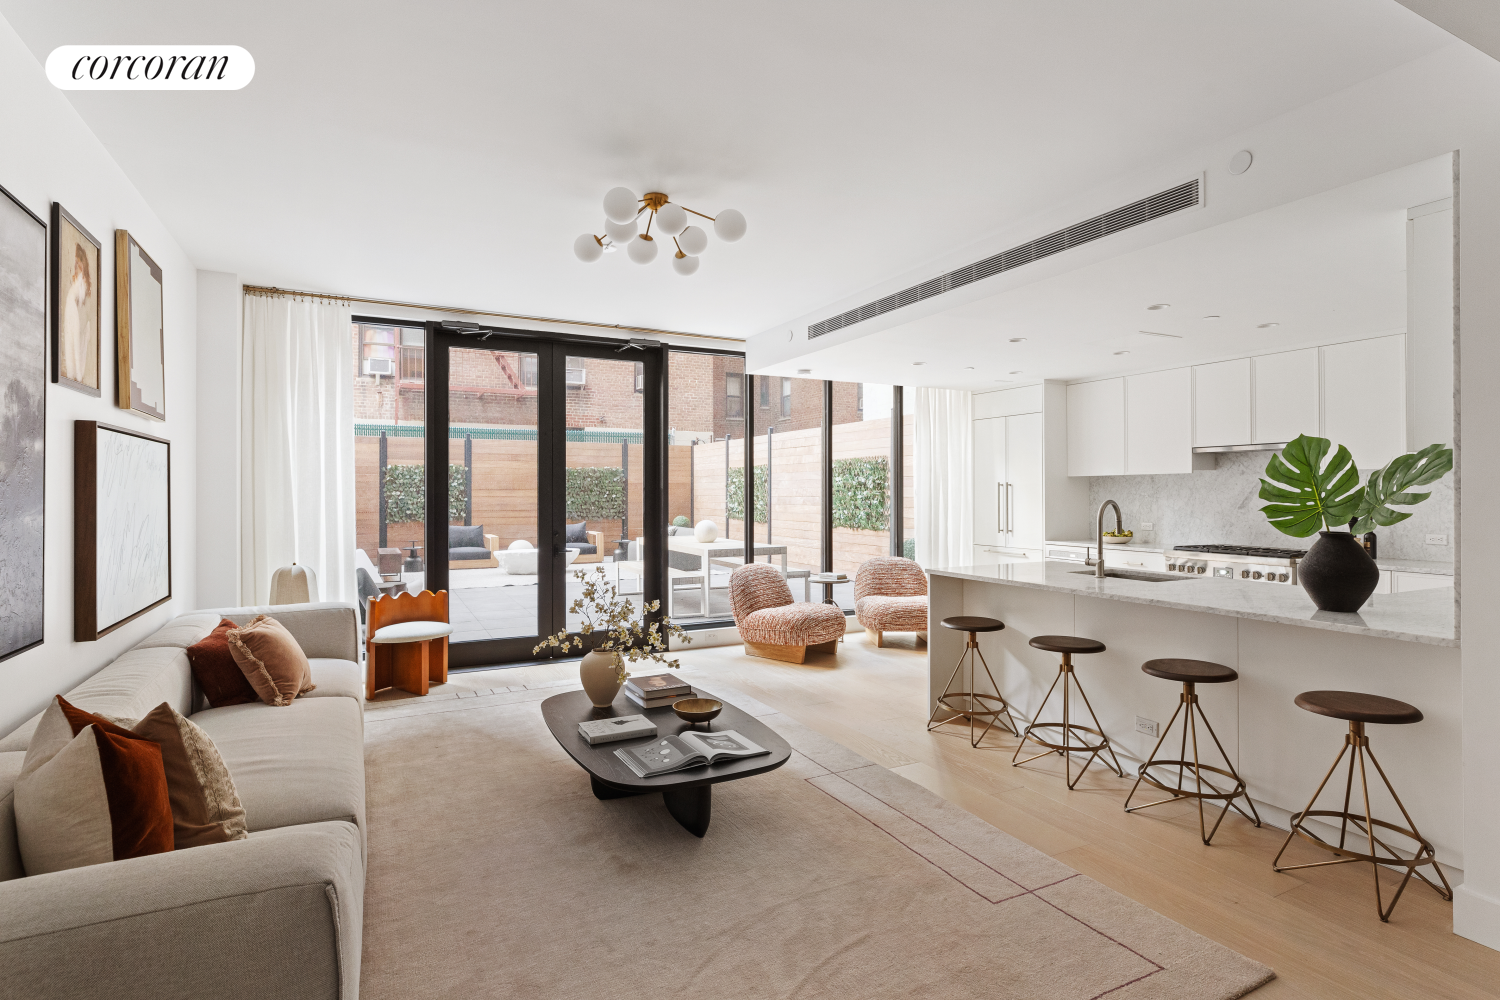 323 East 79th Street Mais, Yorkville, Upper East Side, NYC - 4 Bedrooms  
3.5 Bathrooms  
11 Rooms - 